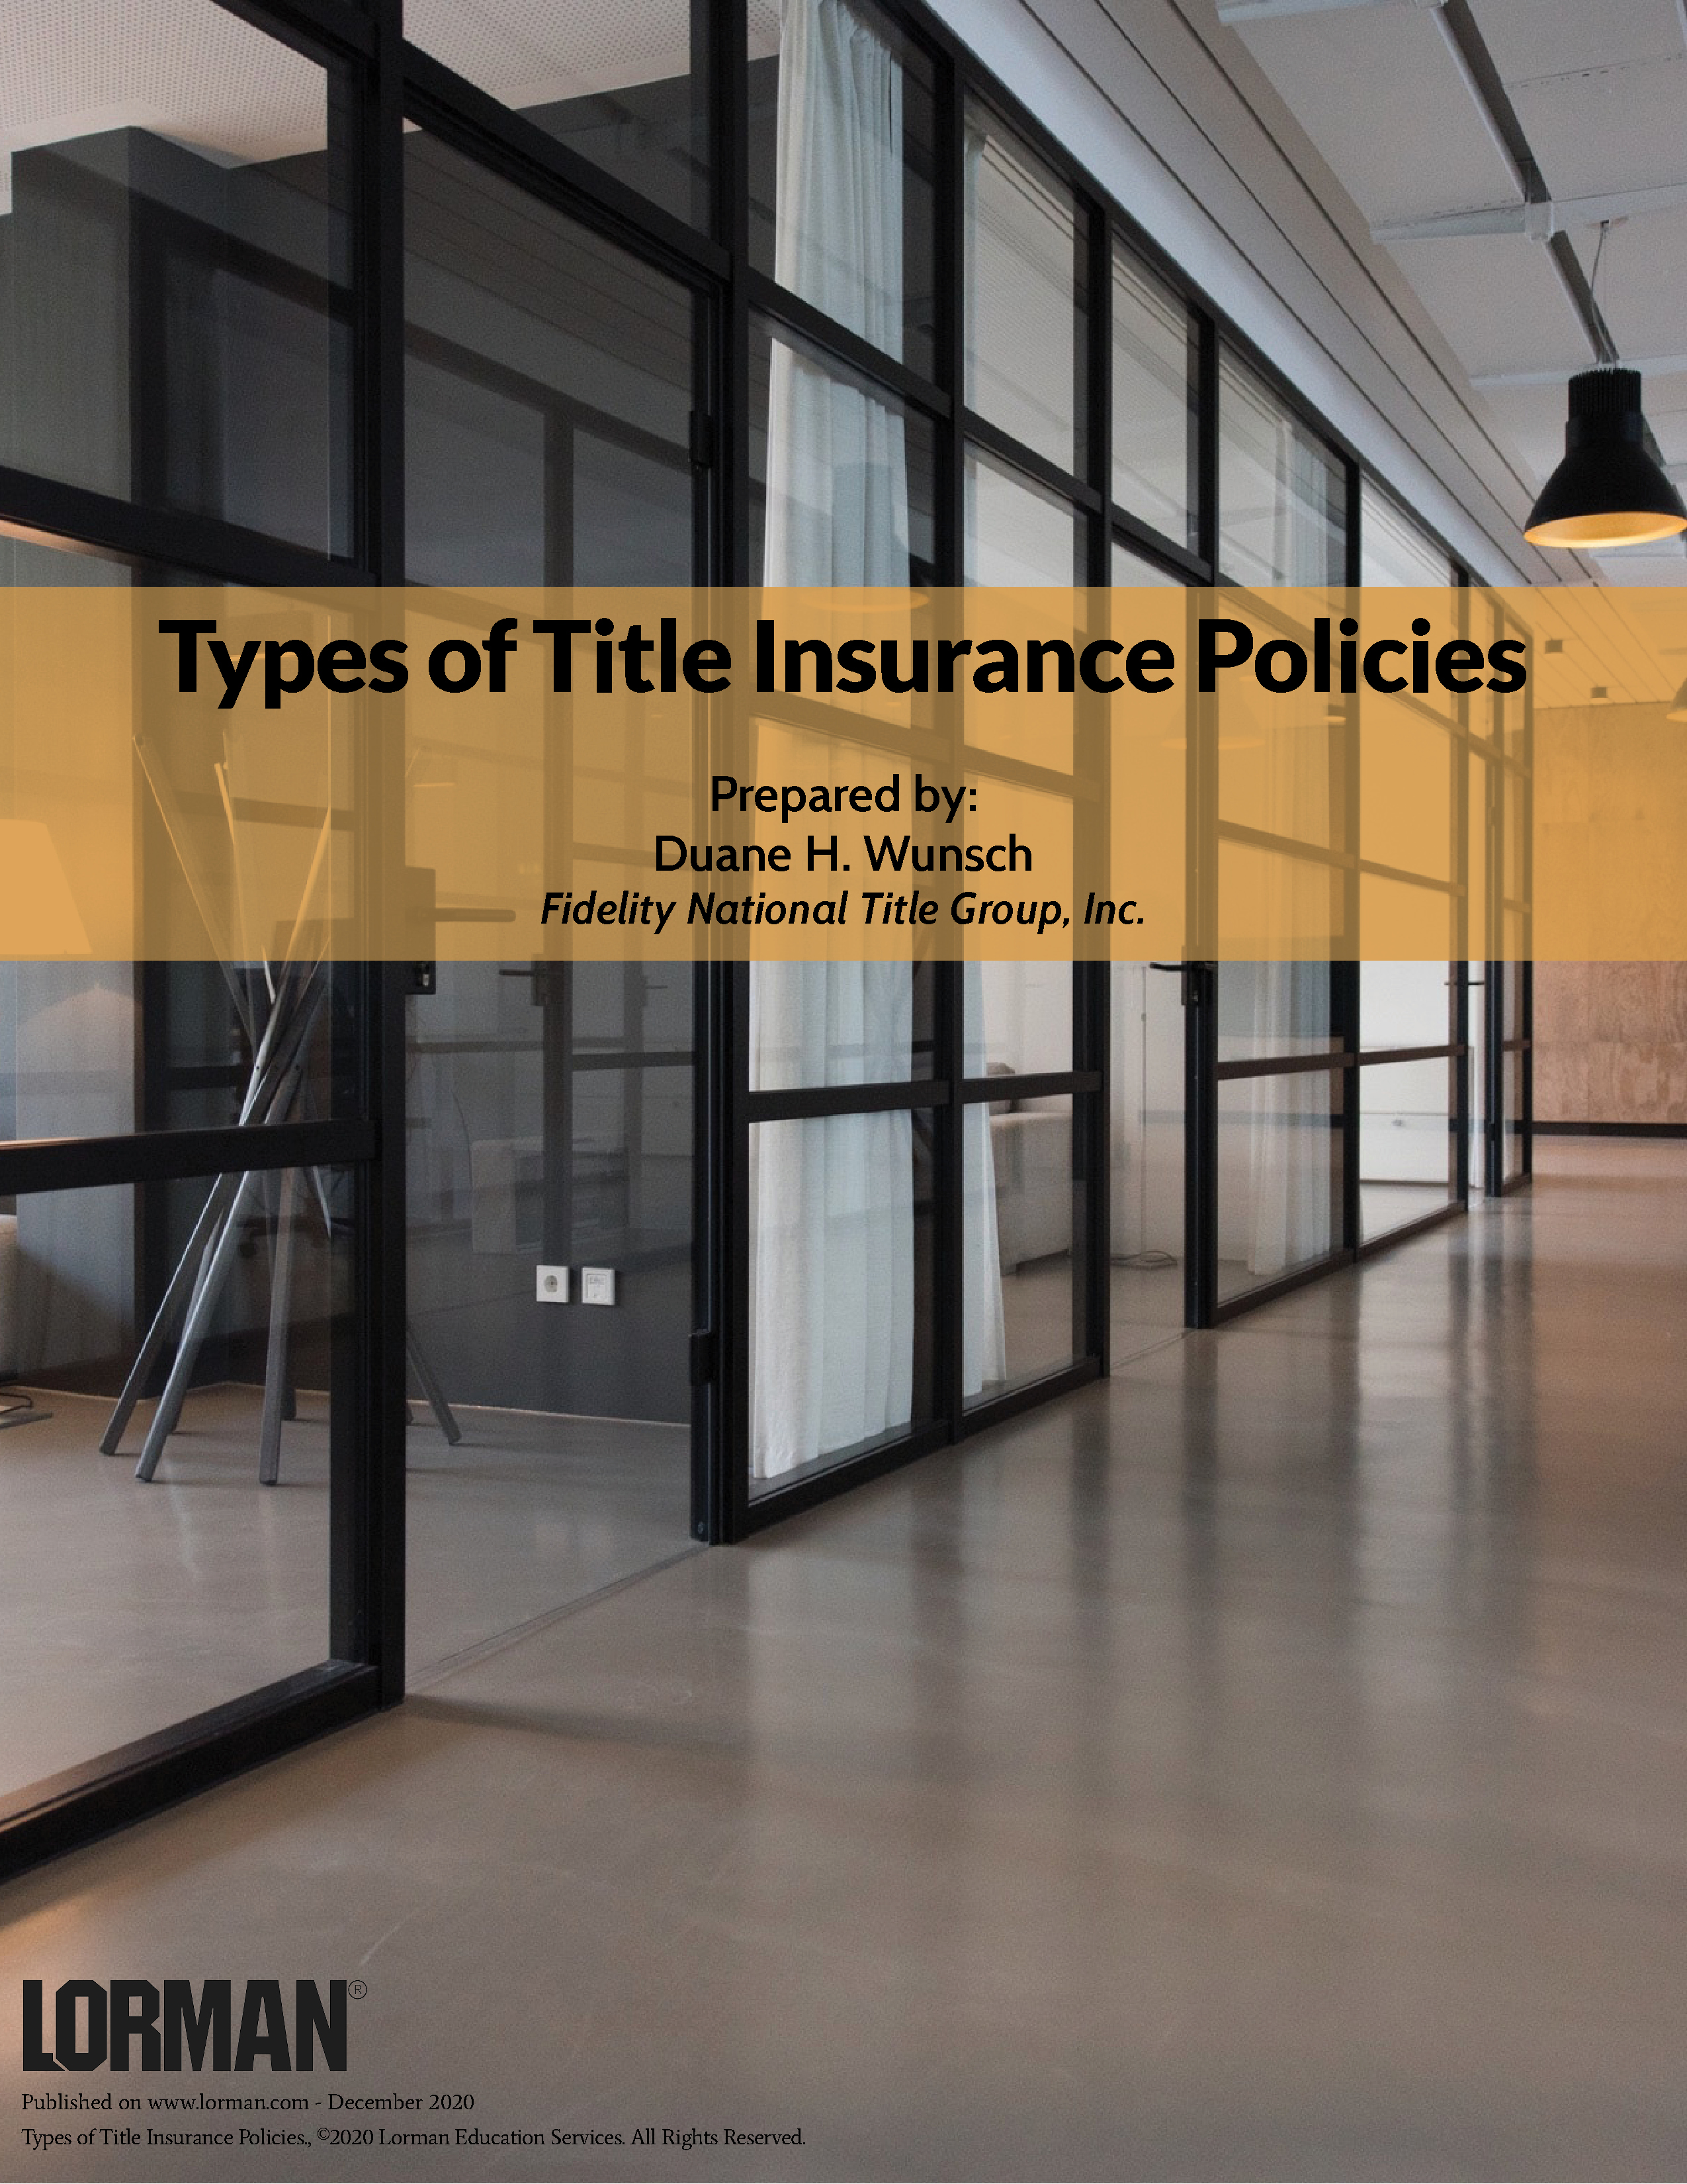 Types of Title Insurance Policies